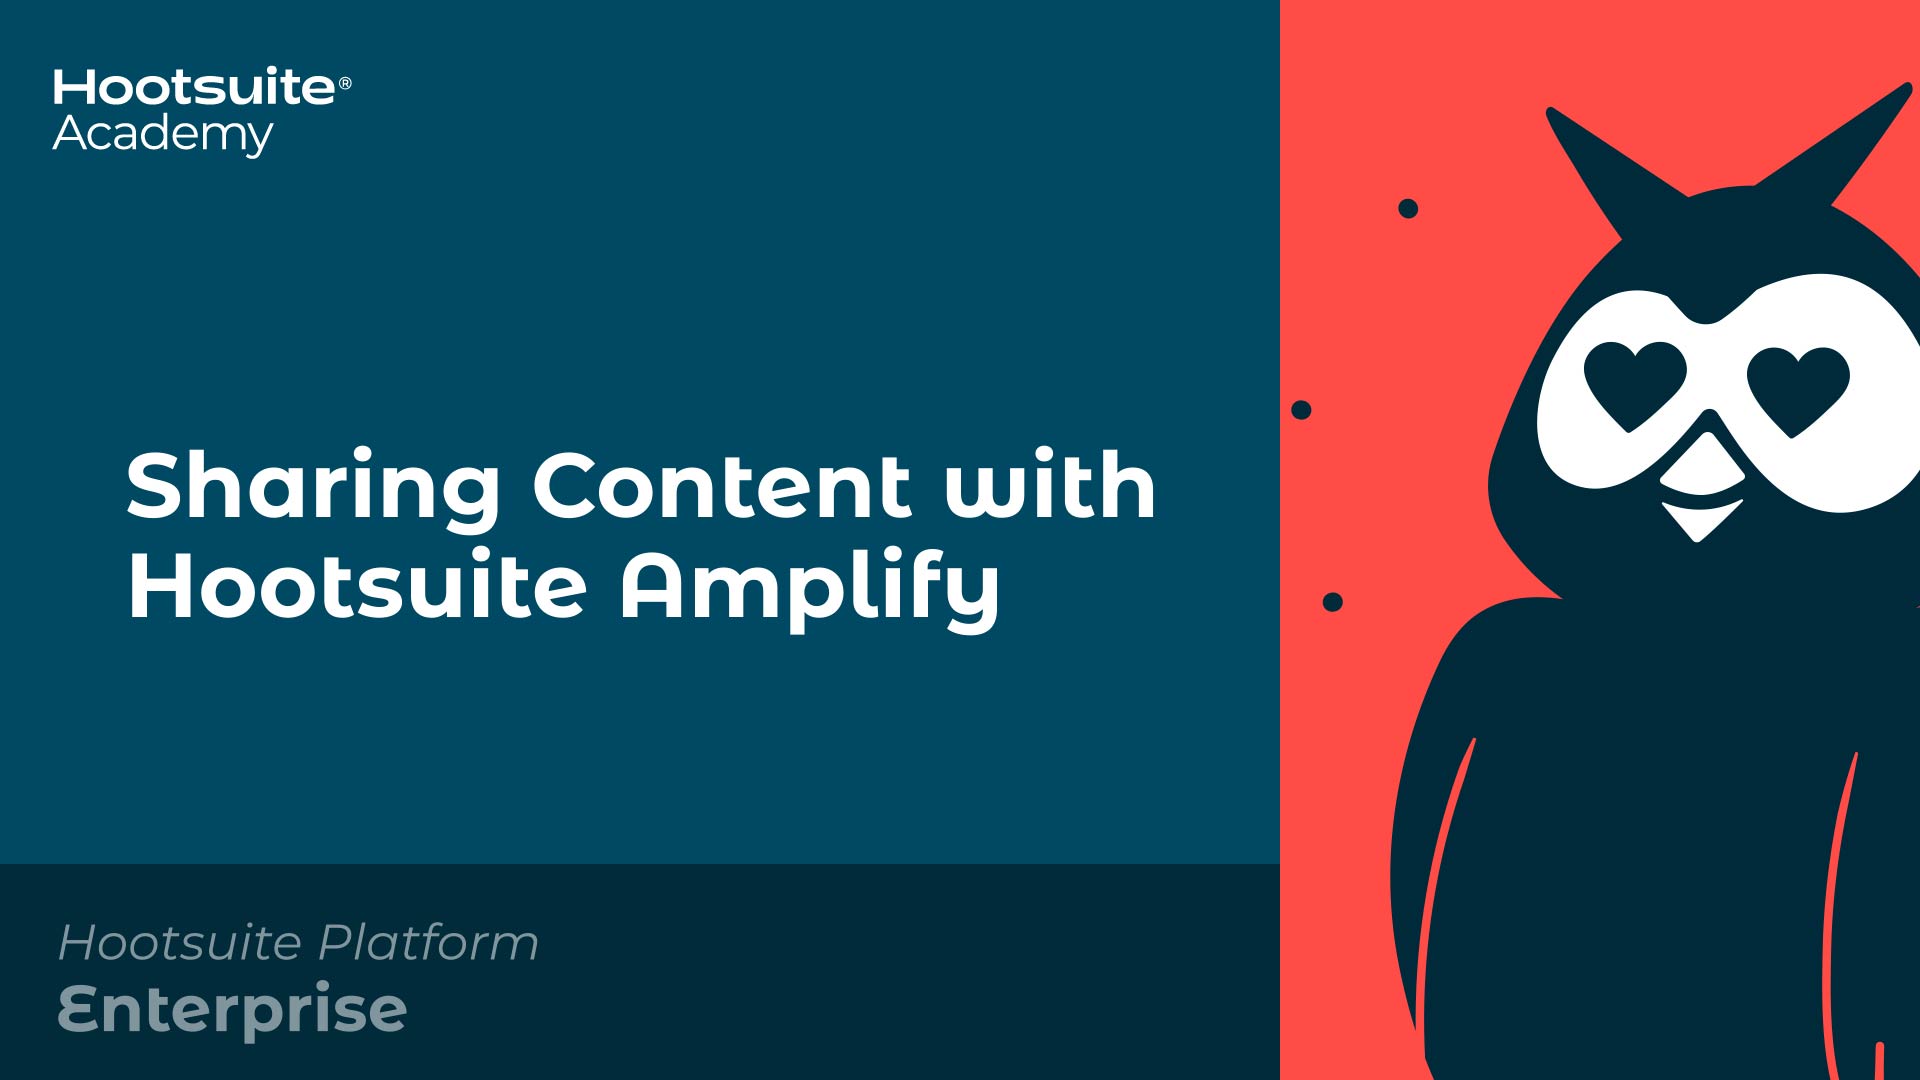 Sharing content with Hootsuite Amplify video.